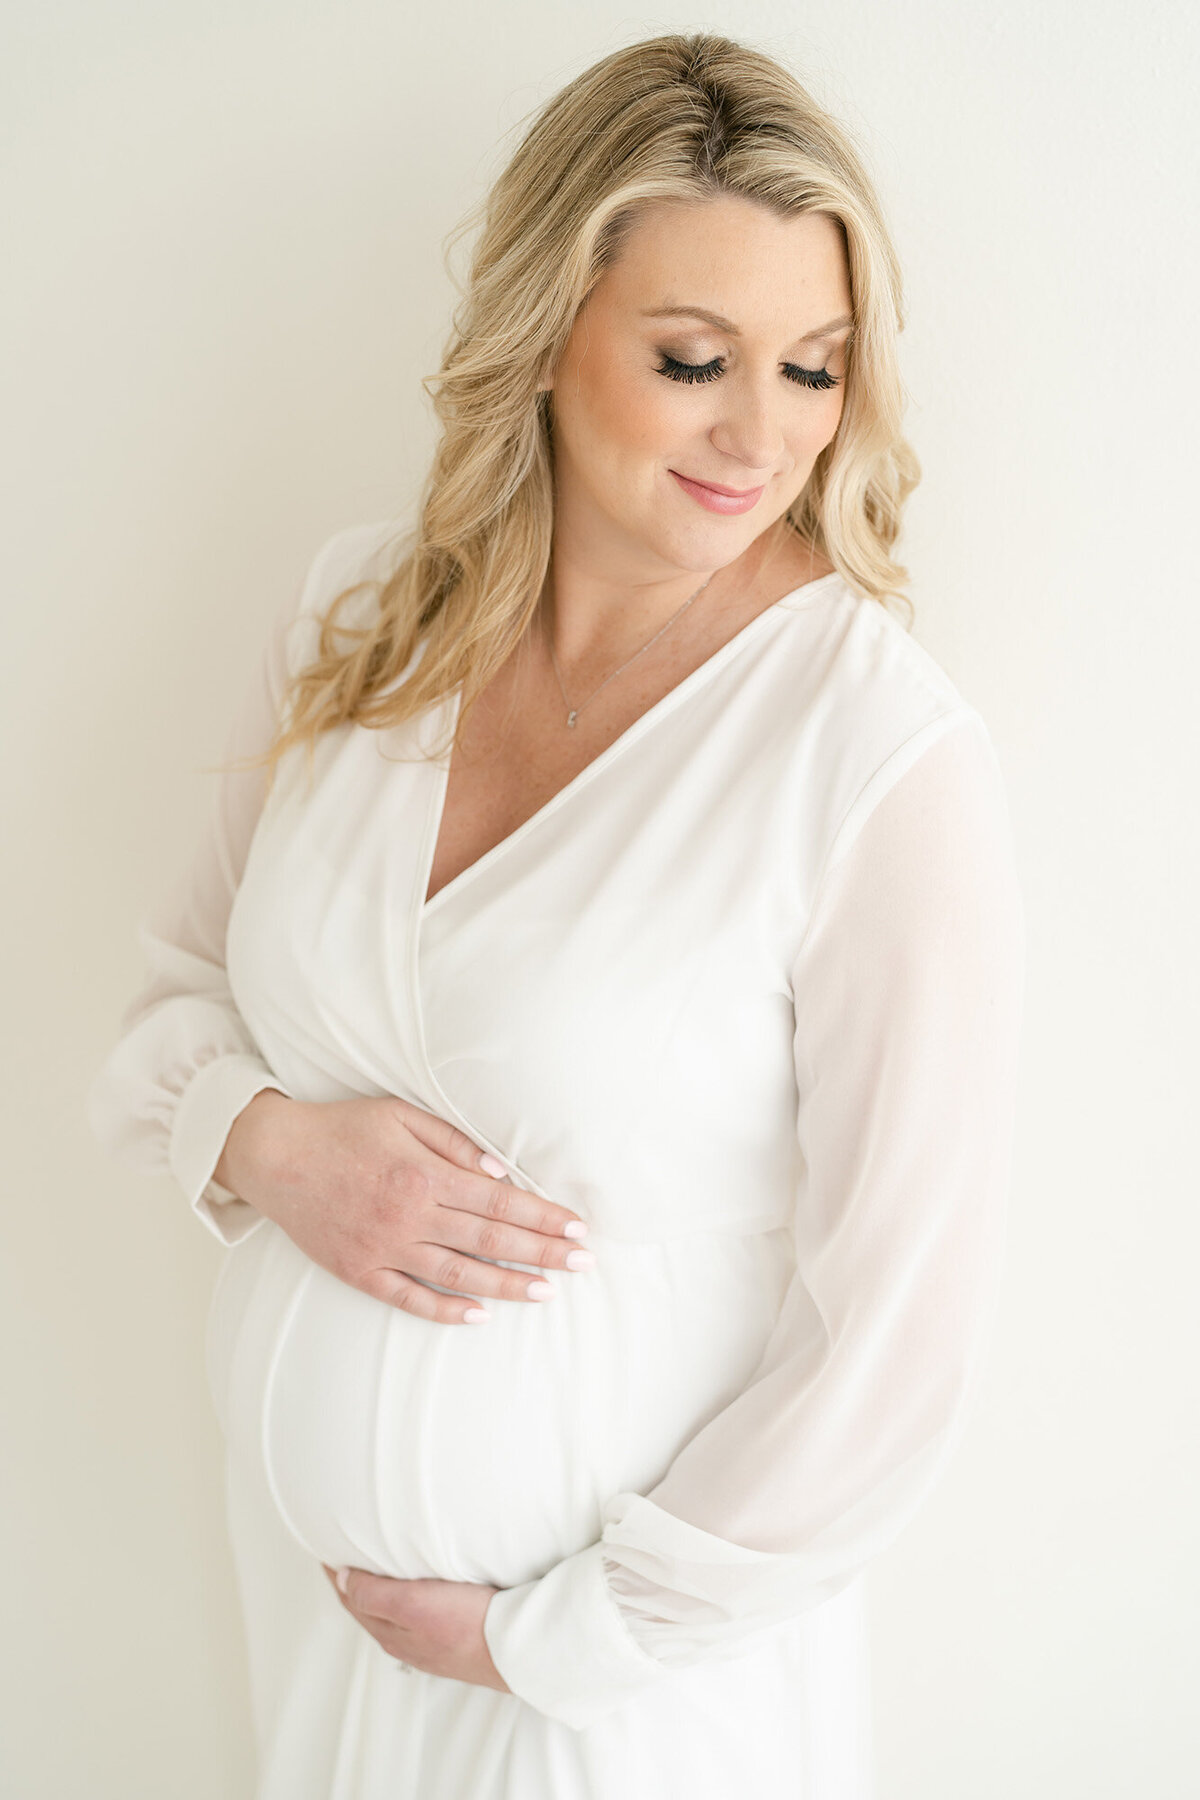 Pregnant Louisville KY mother wears white dress during maternity photo shoot at Julie Brock Photography